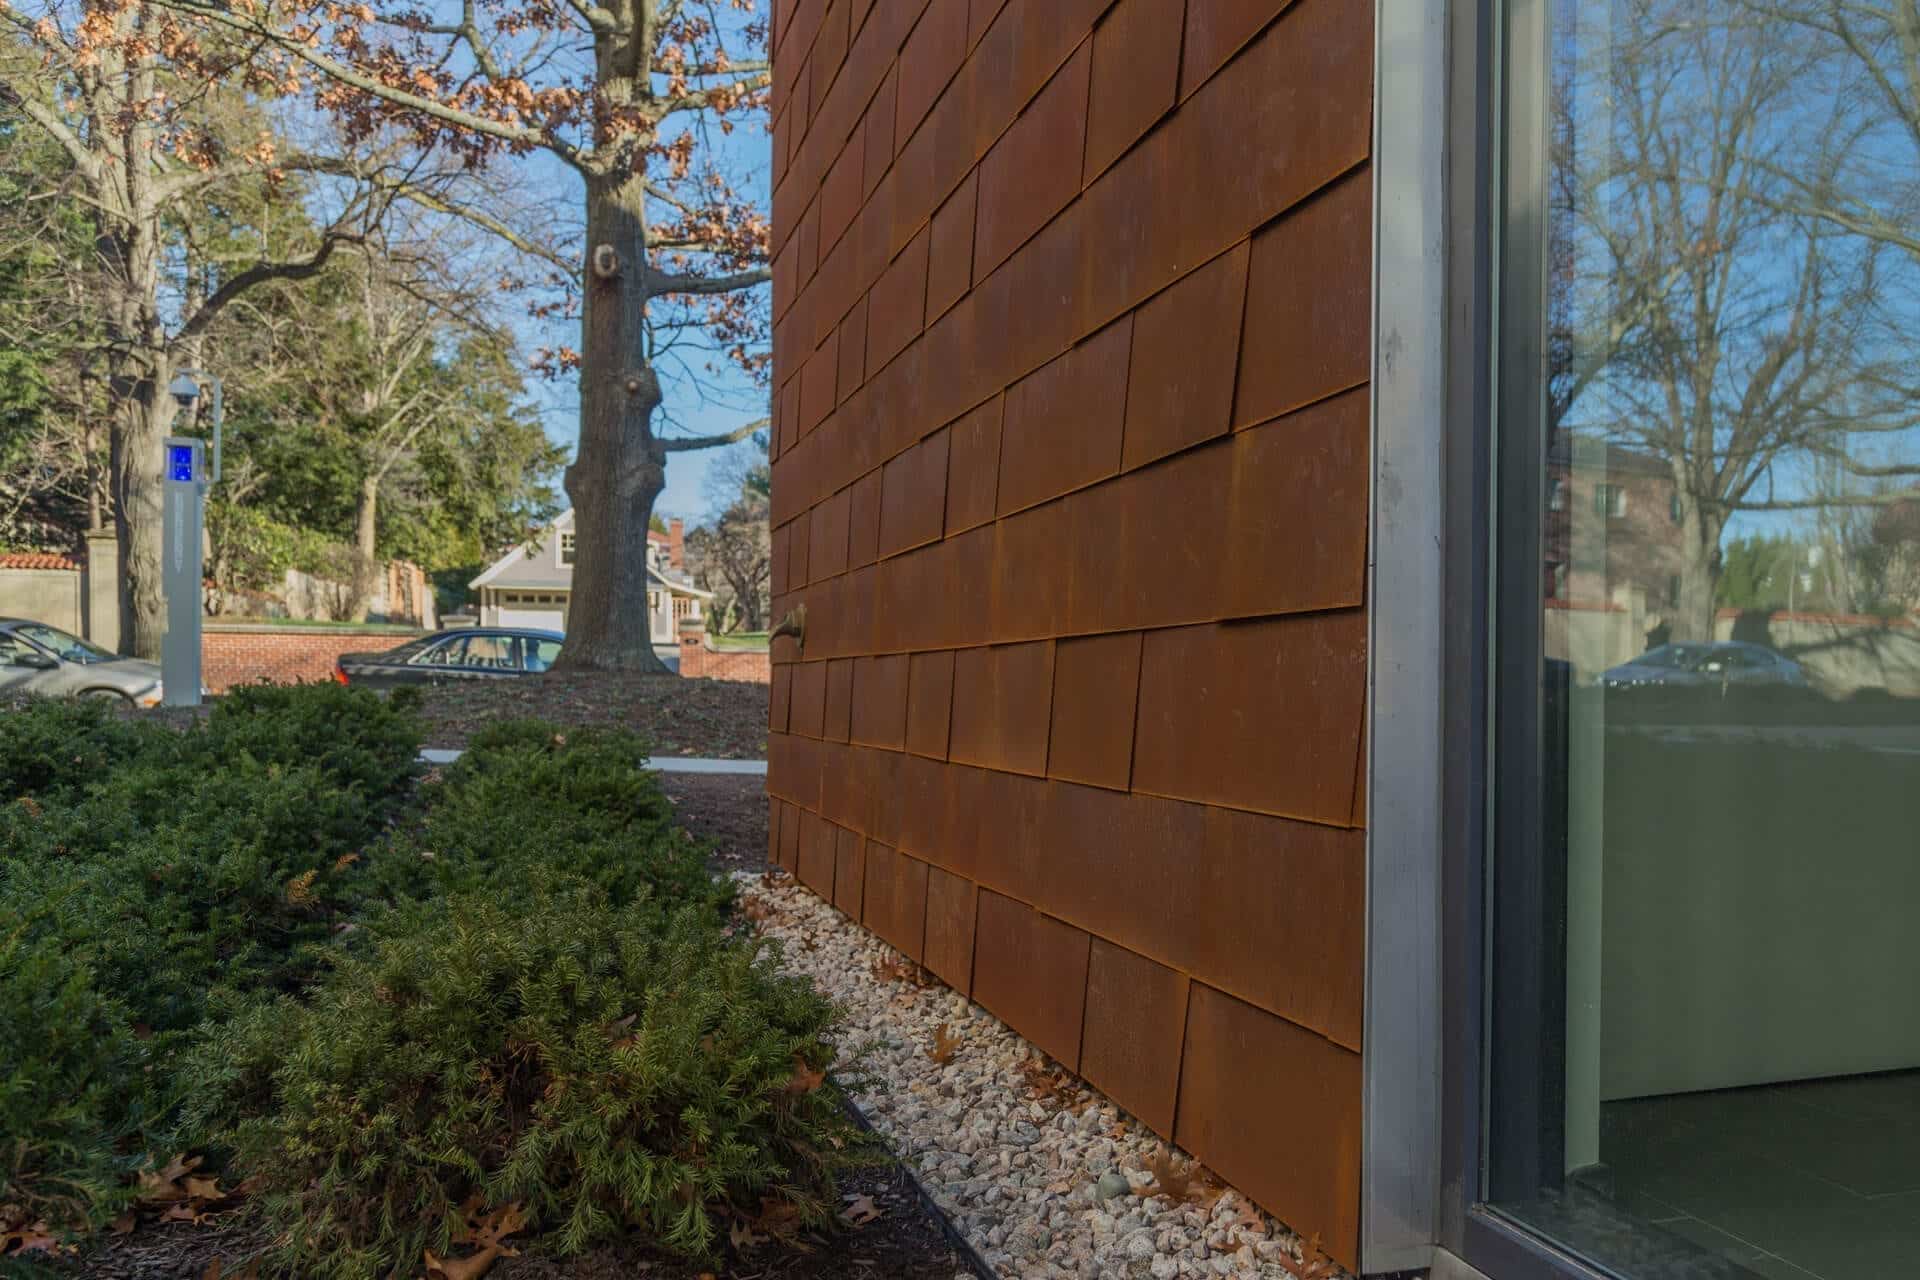 Preweathered steel shingle cladding on the Applied Math building at Brown University.